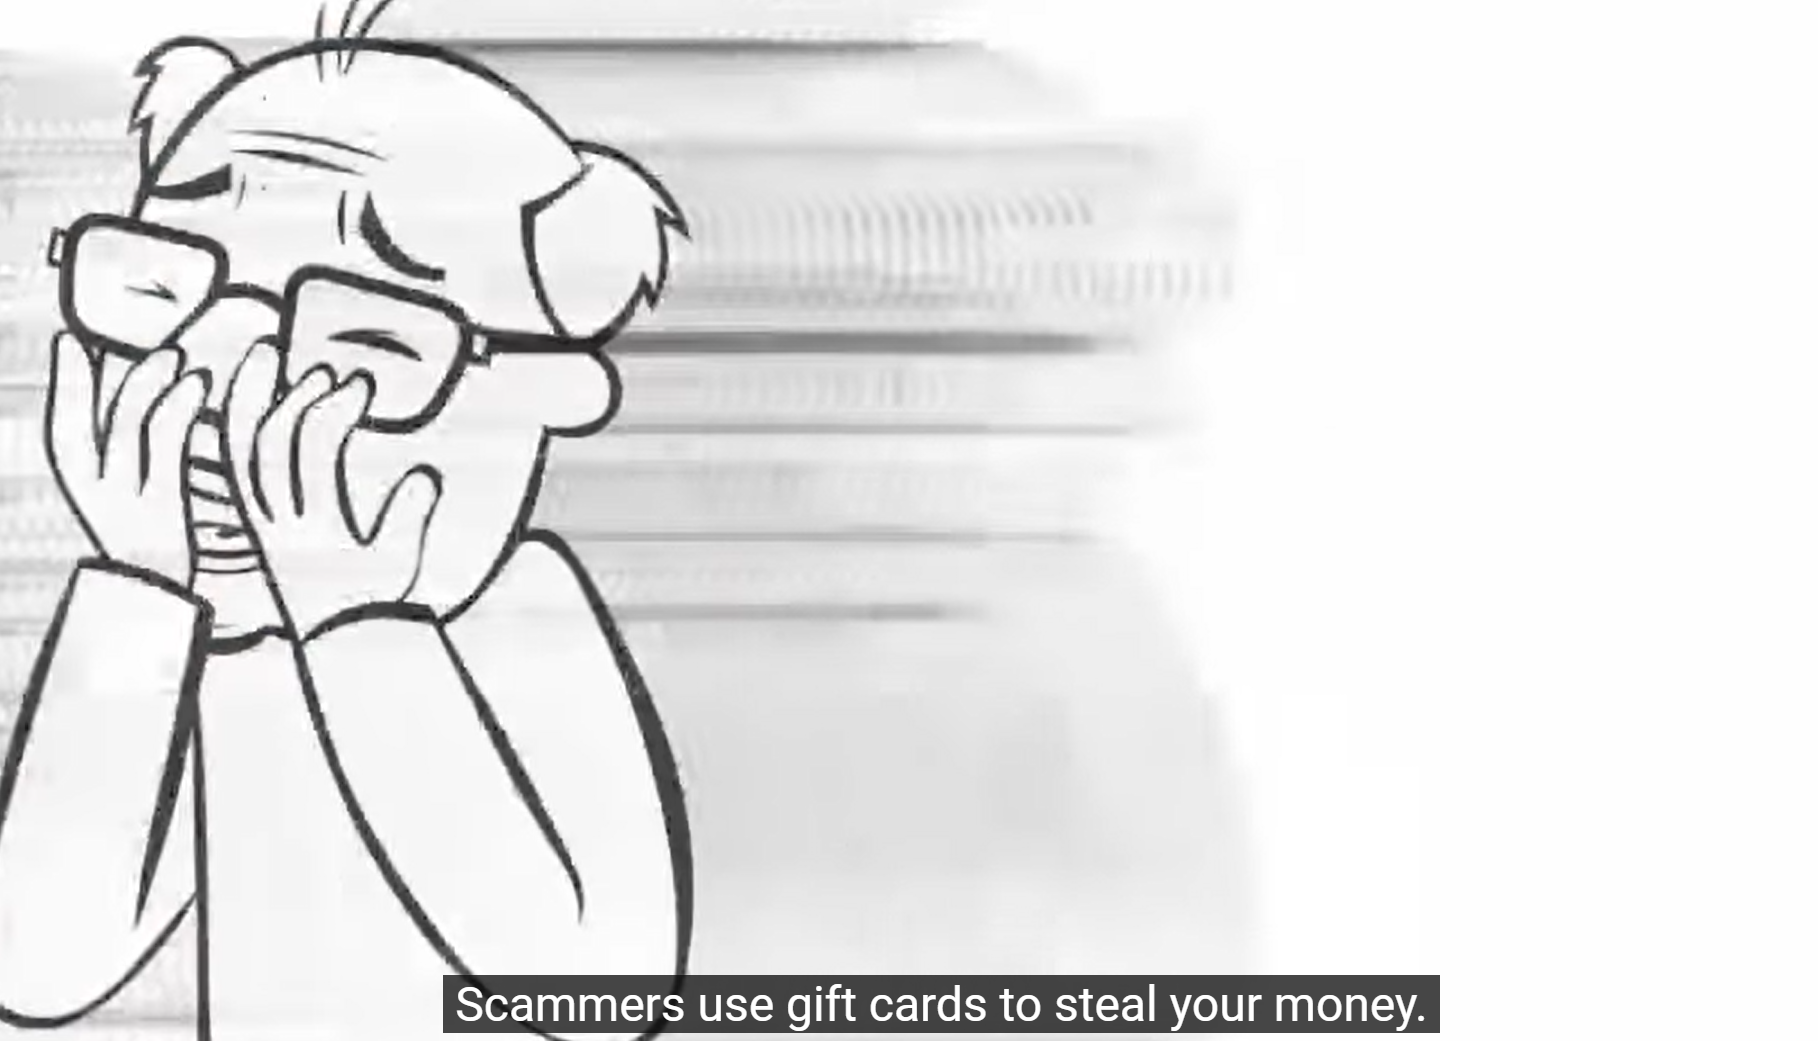 SCAMMERS USE GIFT CARDS TO STEAL YOUR MONEY